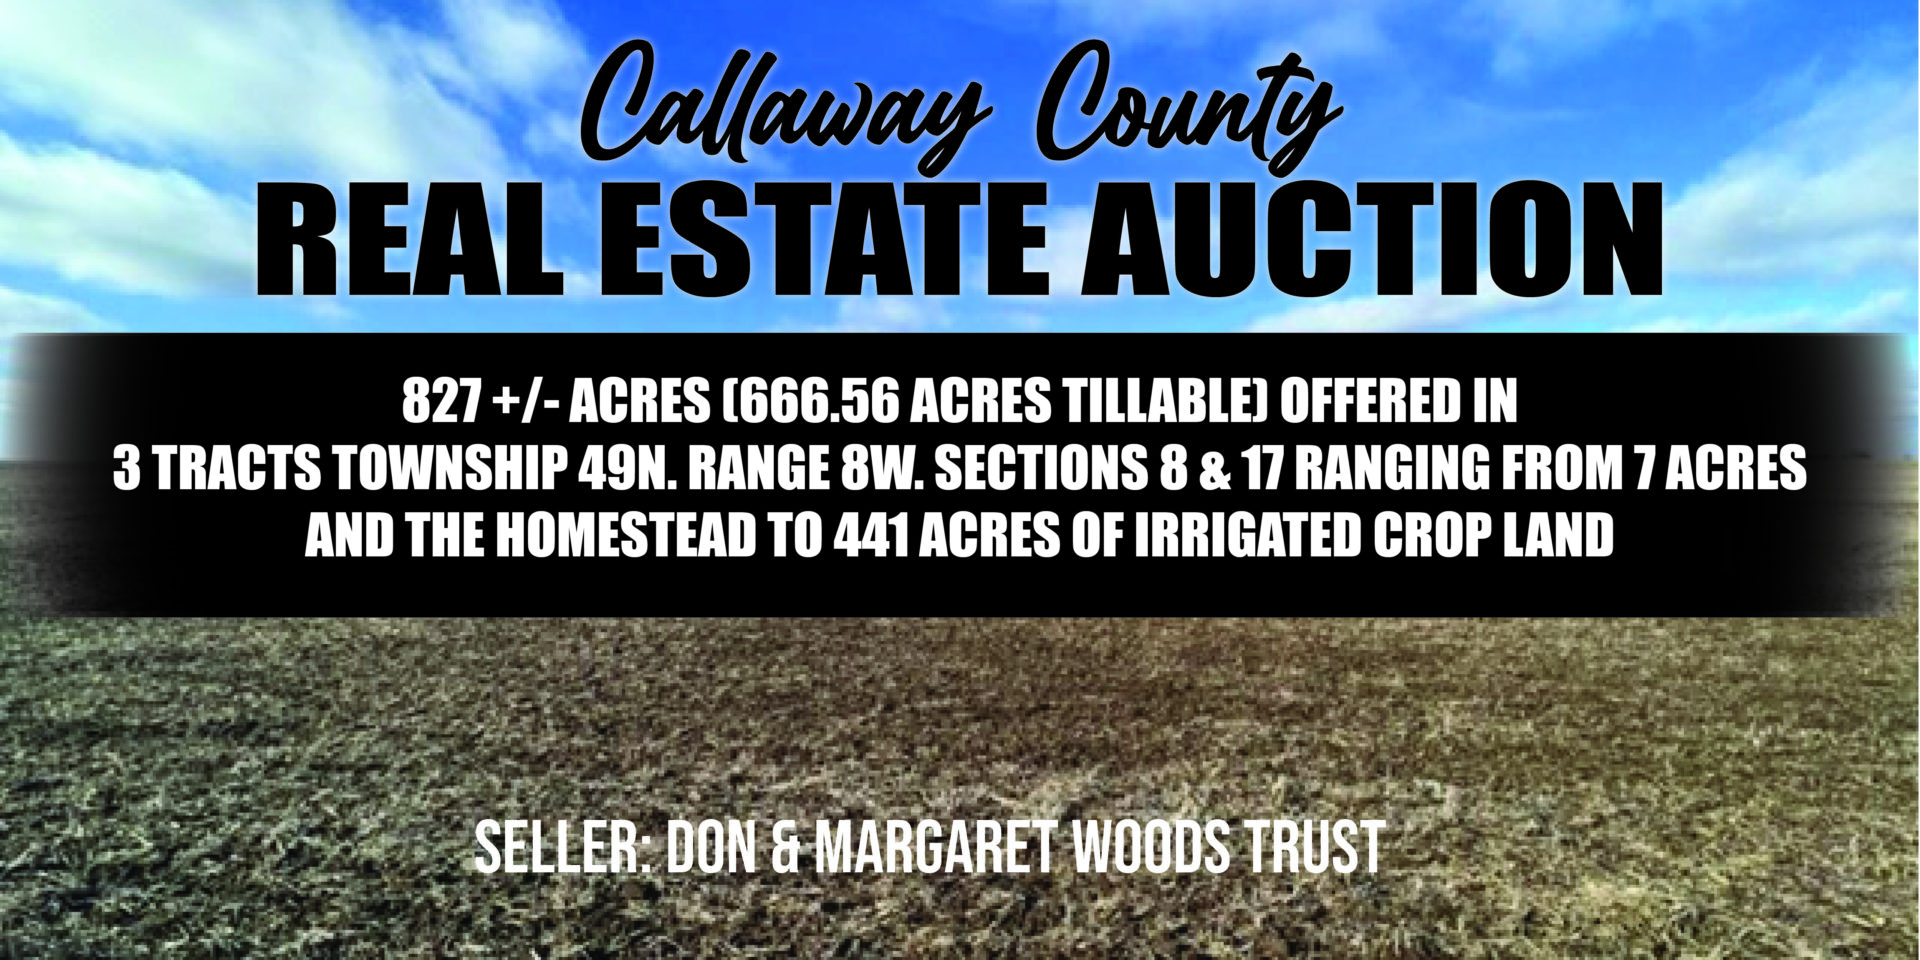 Callaway County Real Estate Auction